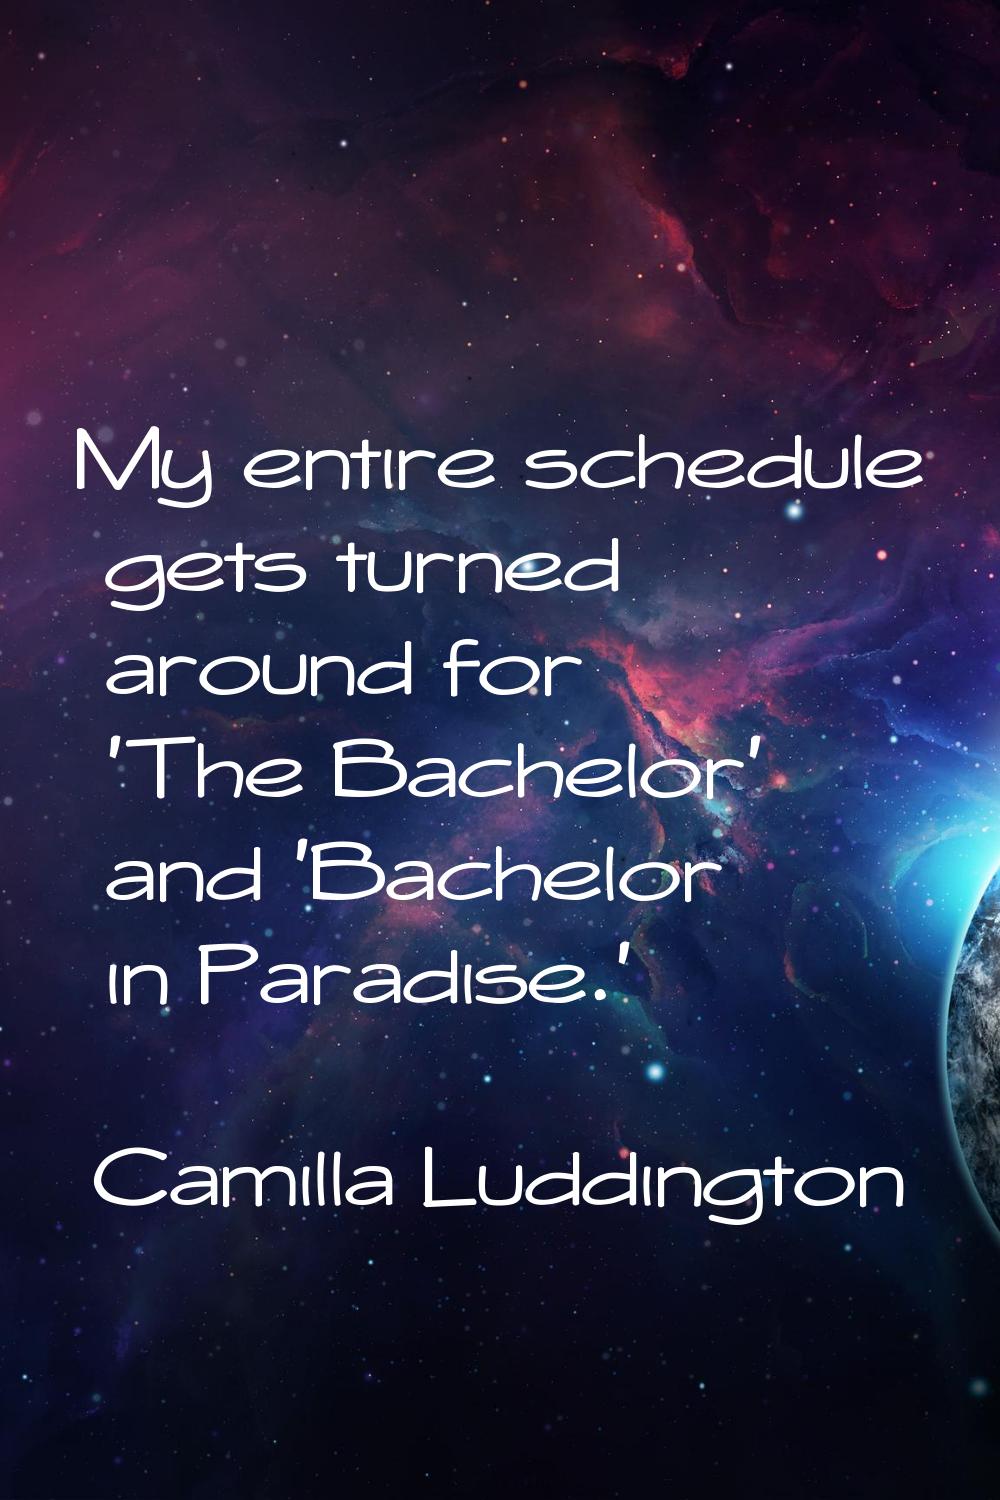 My entire schedule gets turned around for 'The Bachelor' and 'Bachelor in Paradise.'